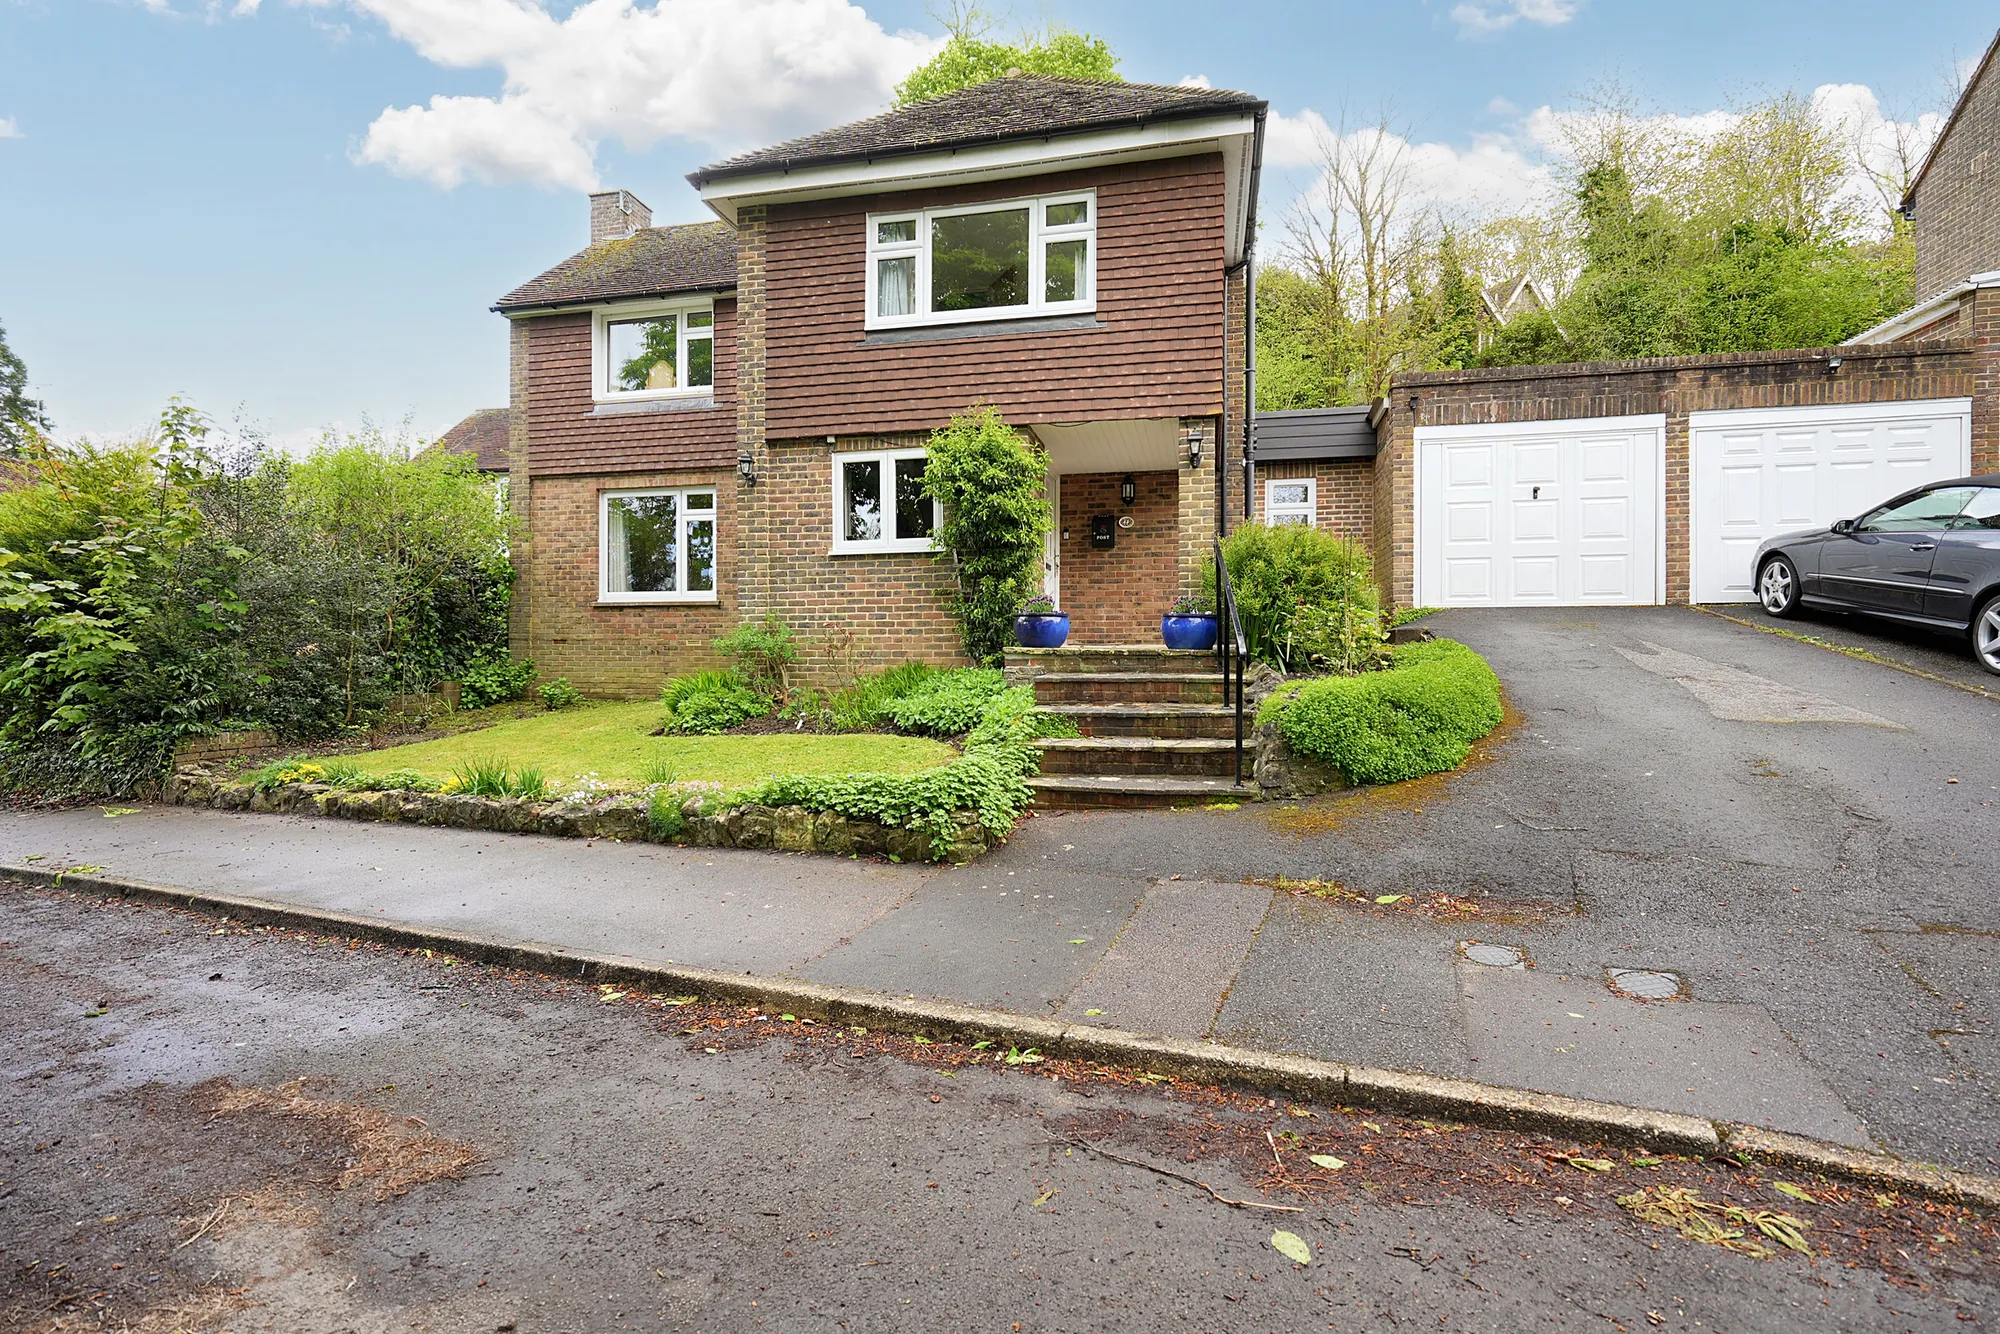 4 bed detached house for sale in Old Loose Close, Maidstone - Property Image 1